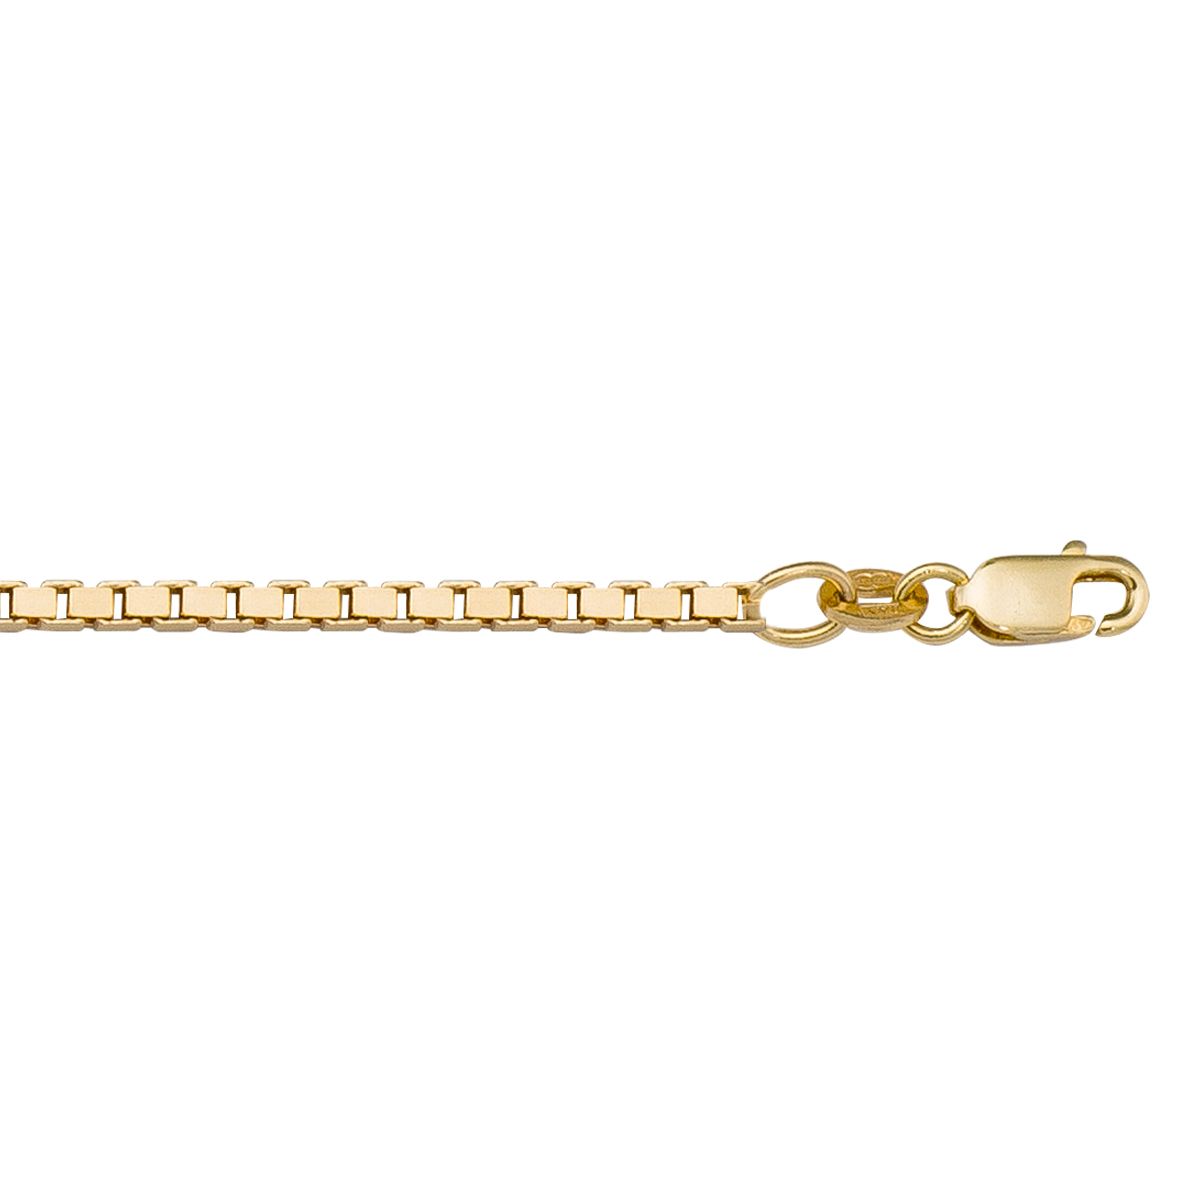 CBX01, Gold Chain, Box, Yellow Gold, 1.5 to 1.9 mm